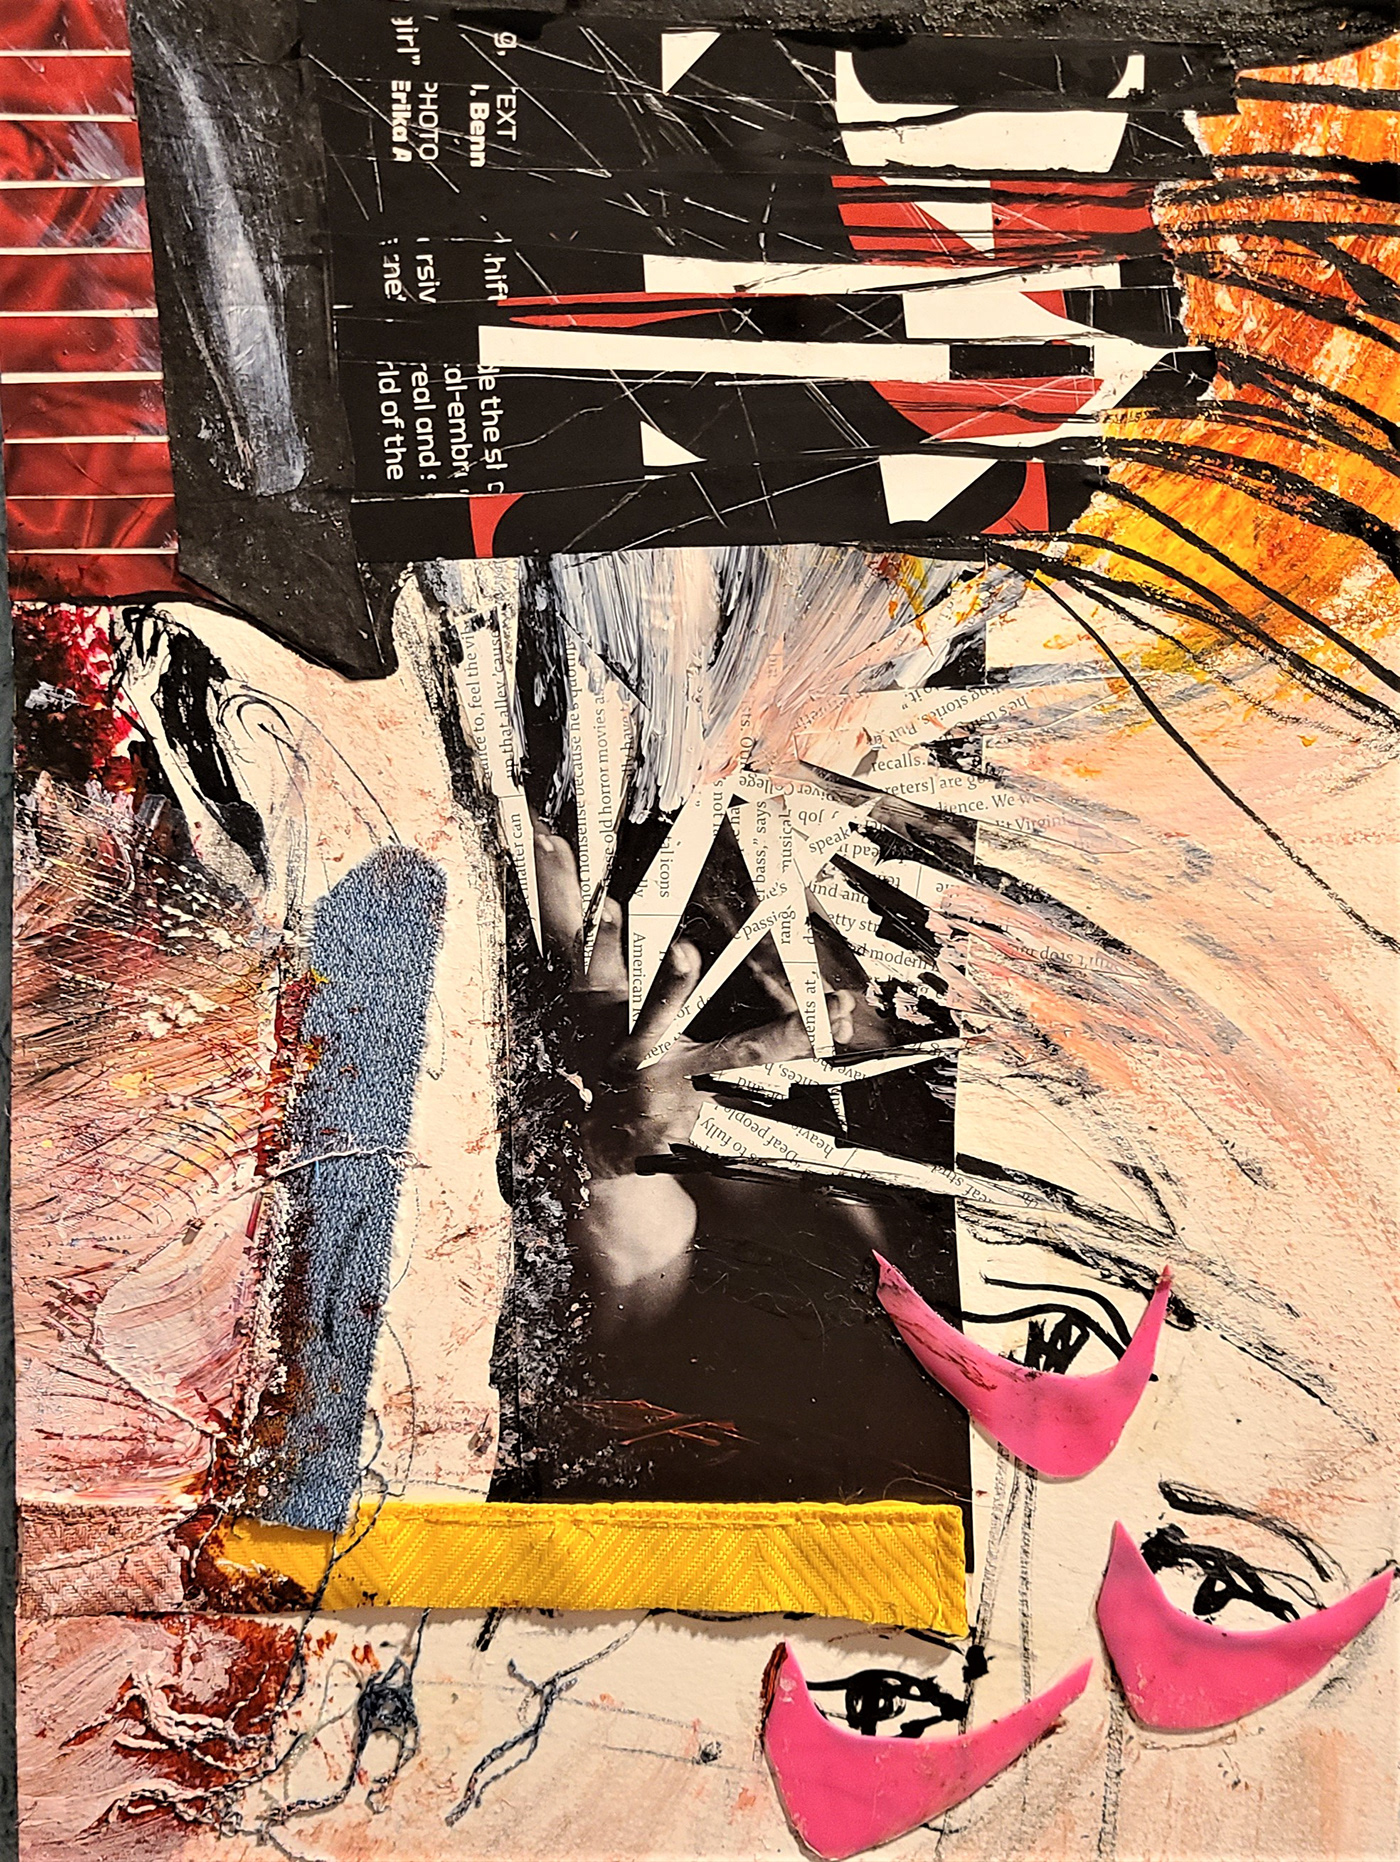 Abstract Art abstract collage brut art collage collage art contemporary art heavy metal marilyn manson neoexpressionism surrealism